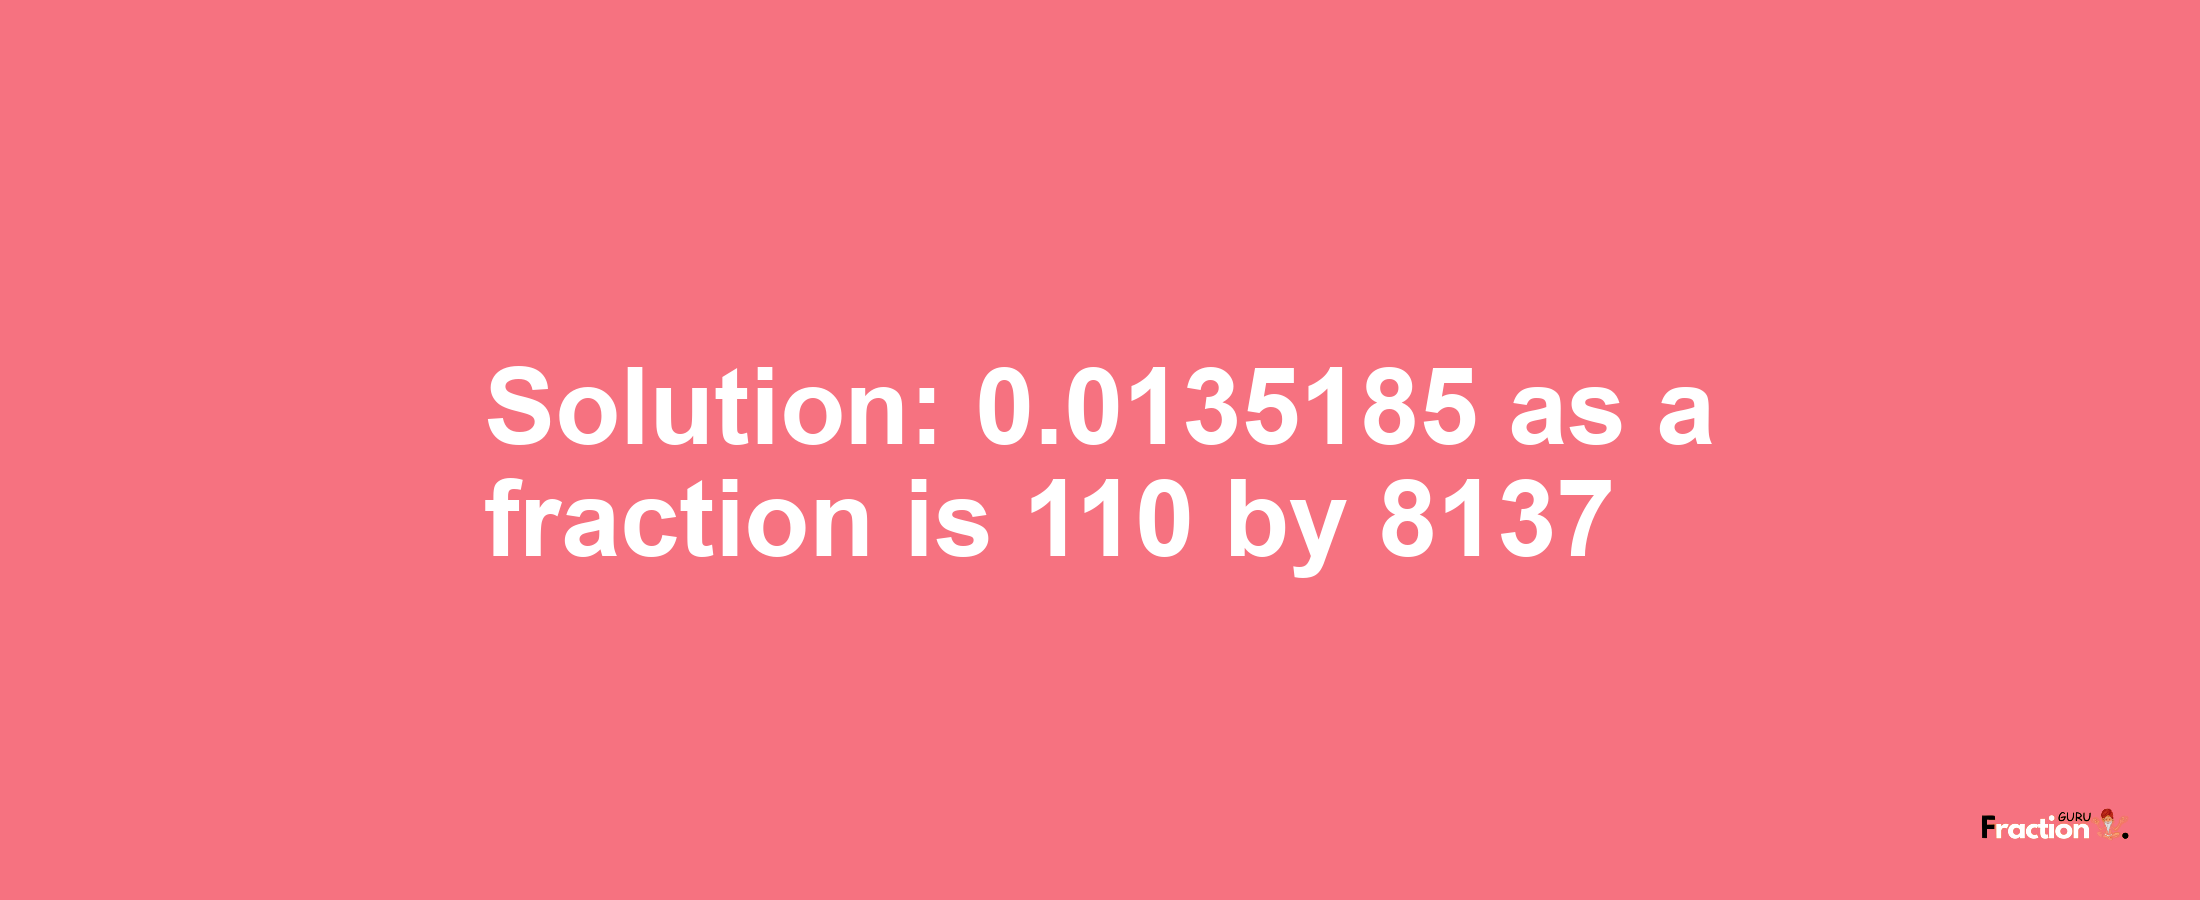 Solution:0.0135185 as a fraction is 110/8137